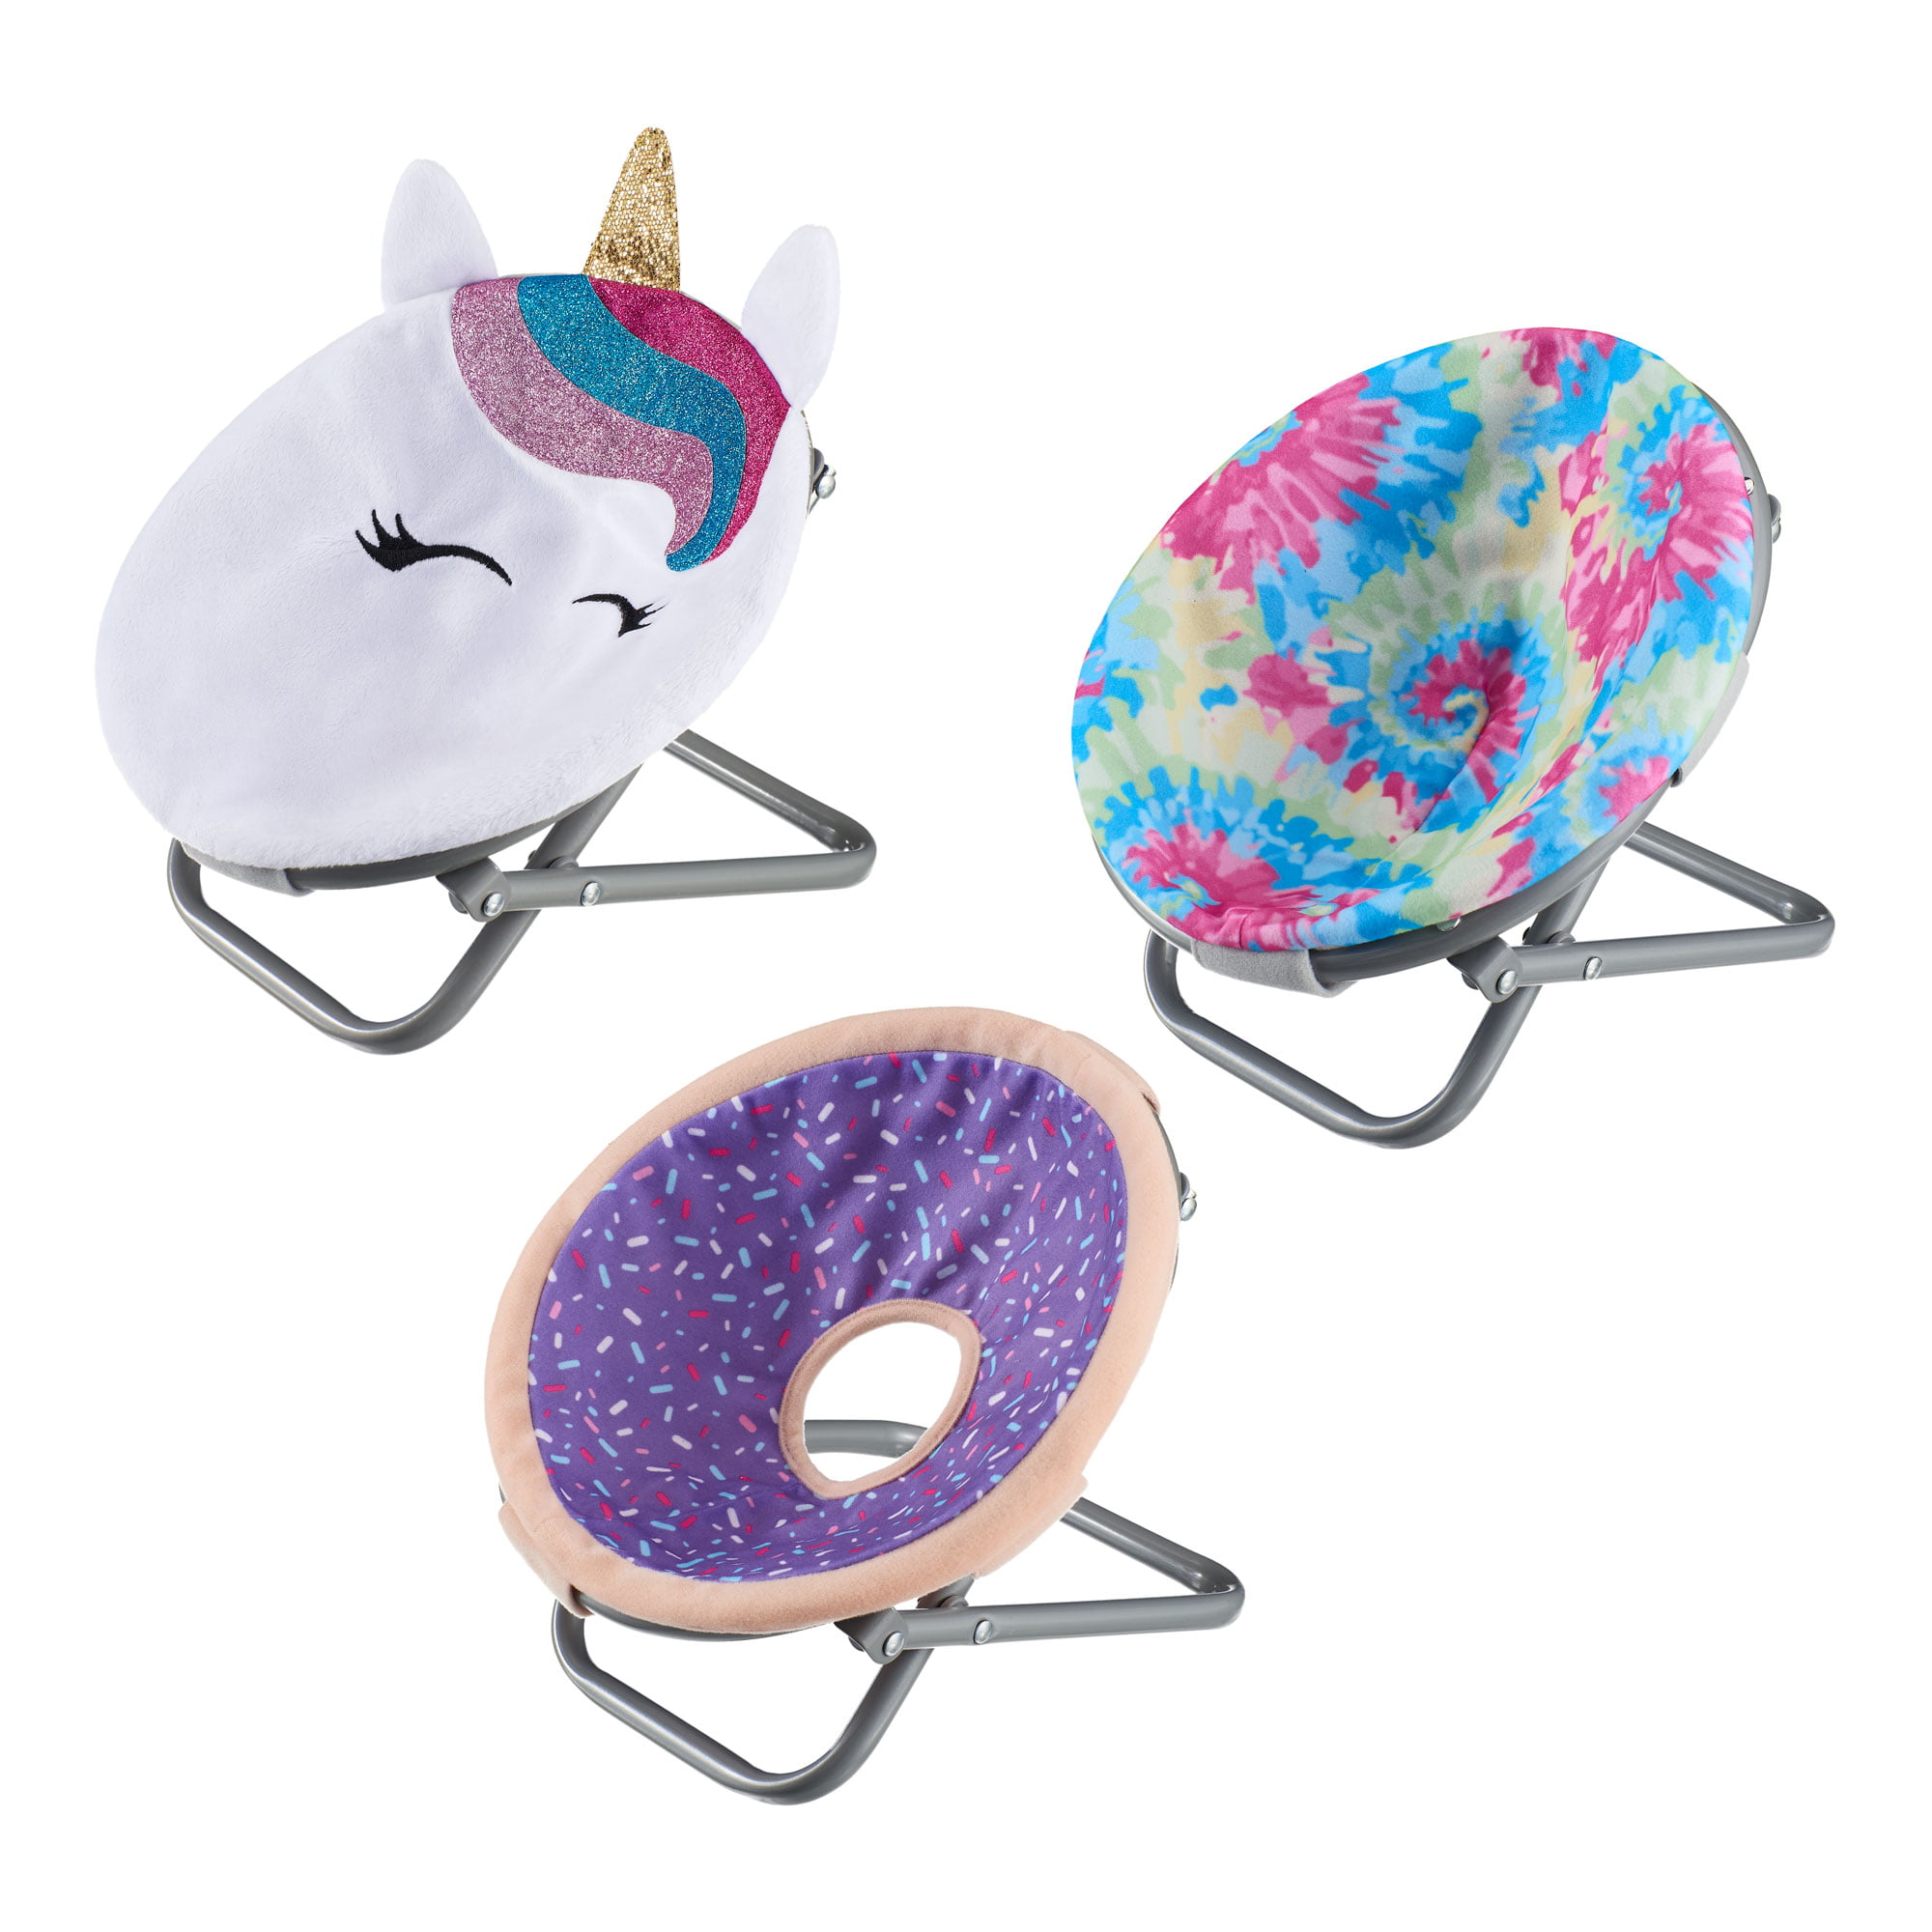 My Life As A Donut Saucer Chair for 18 Dolls (Doll Not Included)